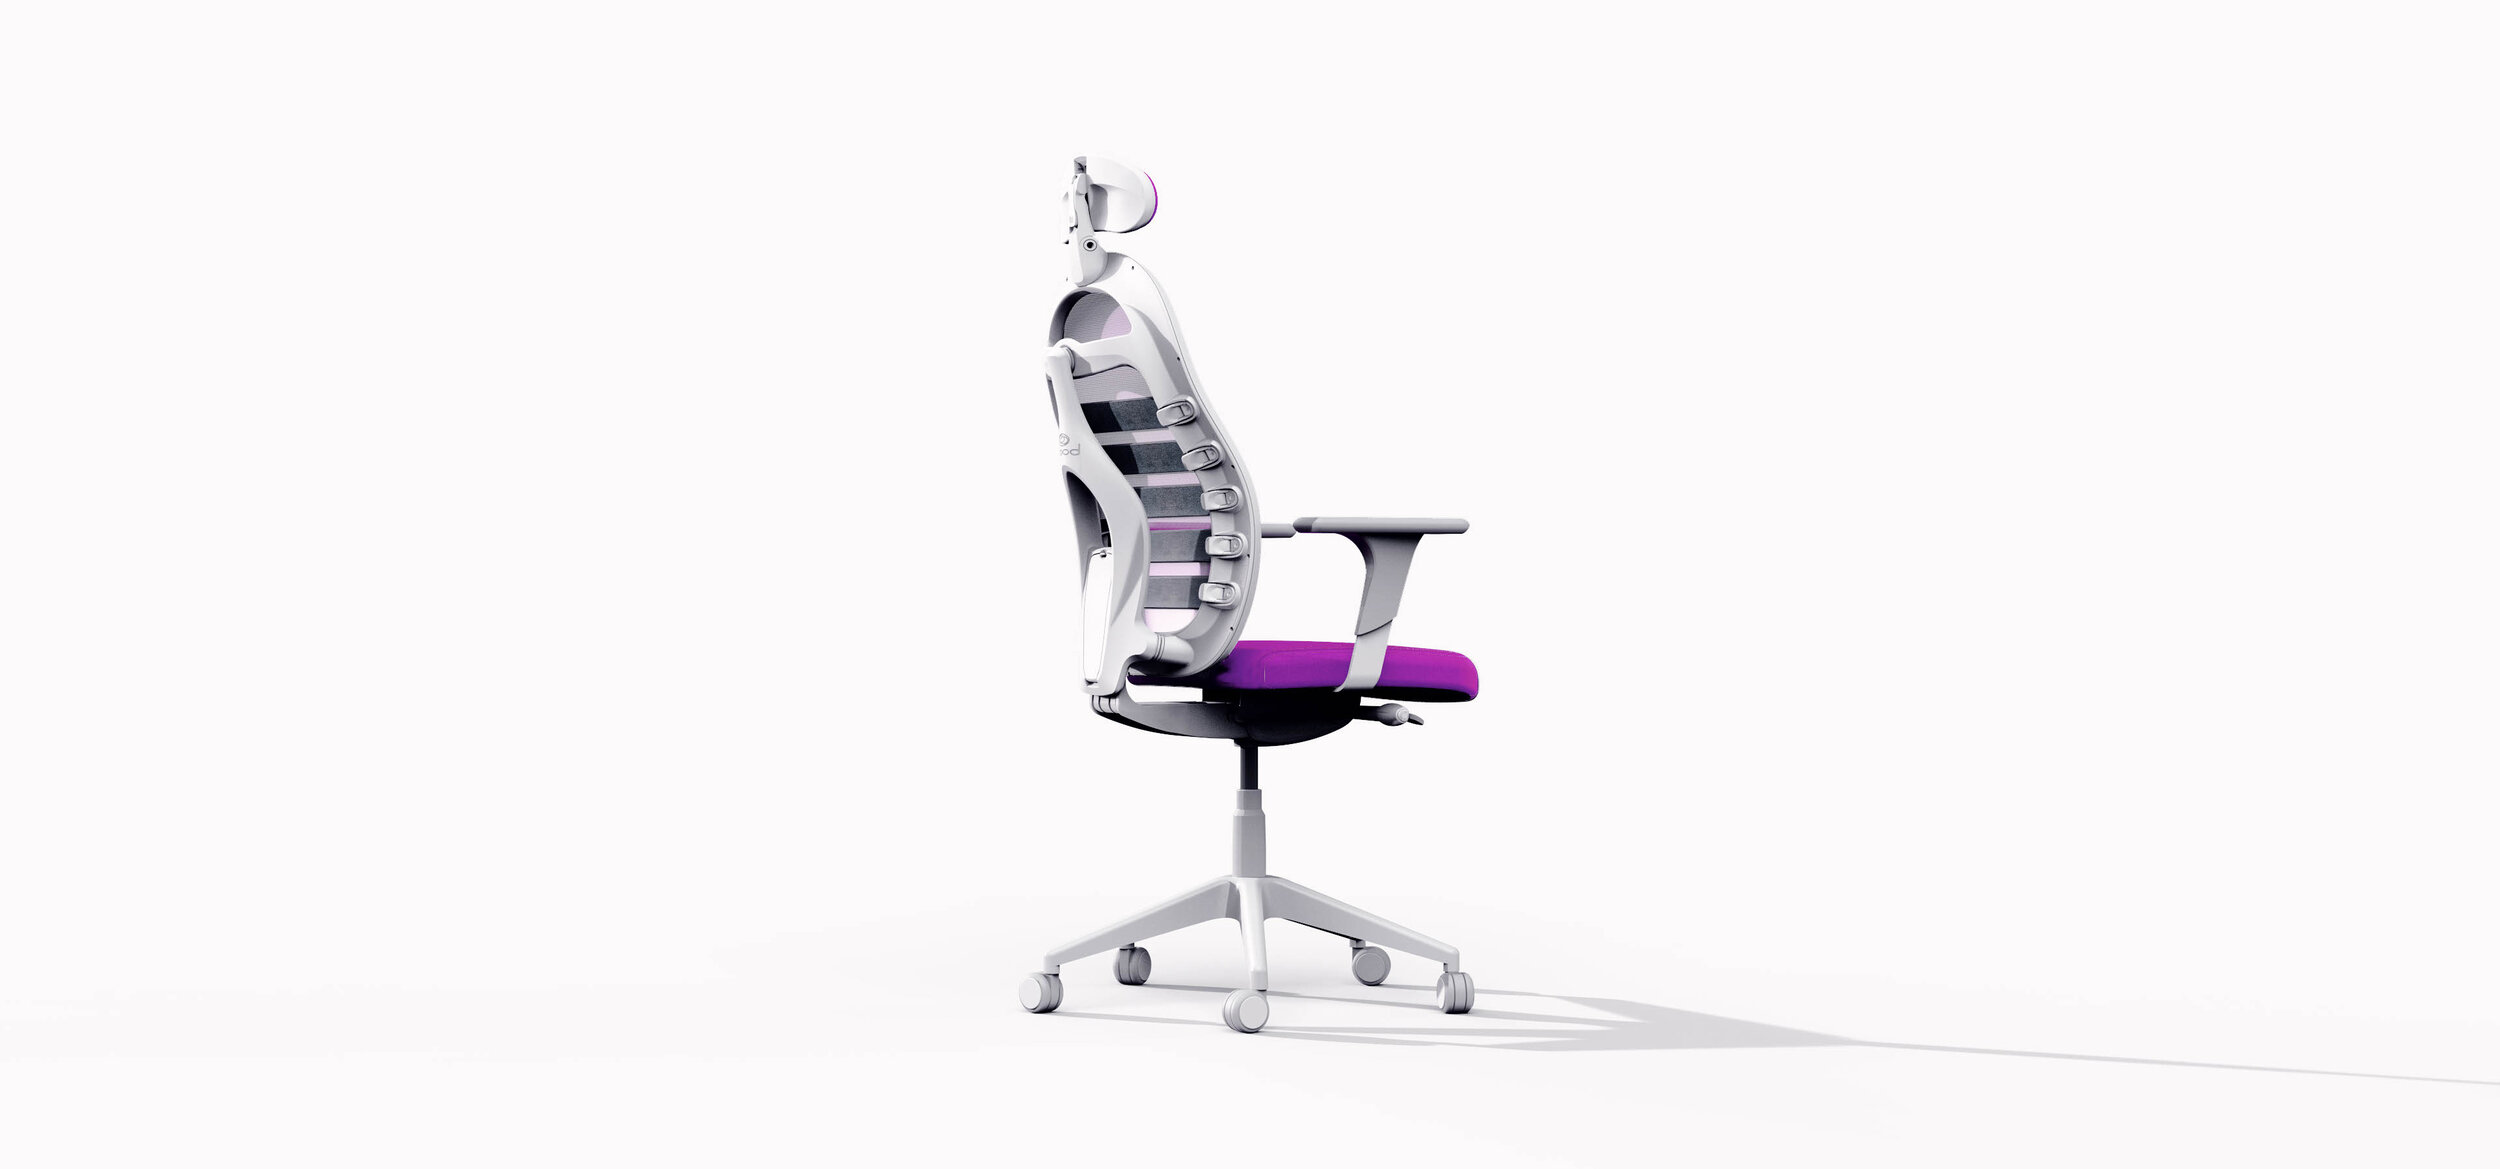 Sit and Move: Cpod Mesh Ergonomic Chair